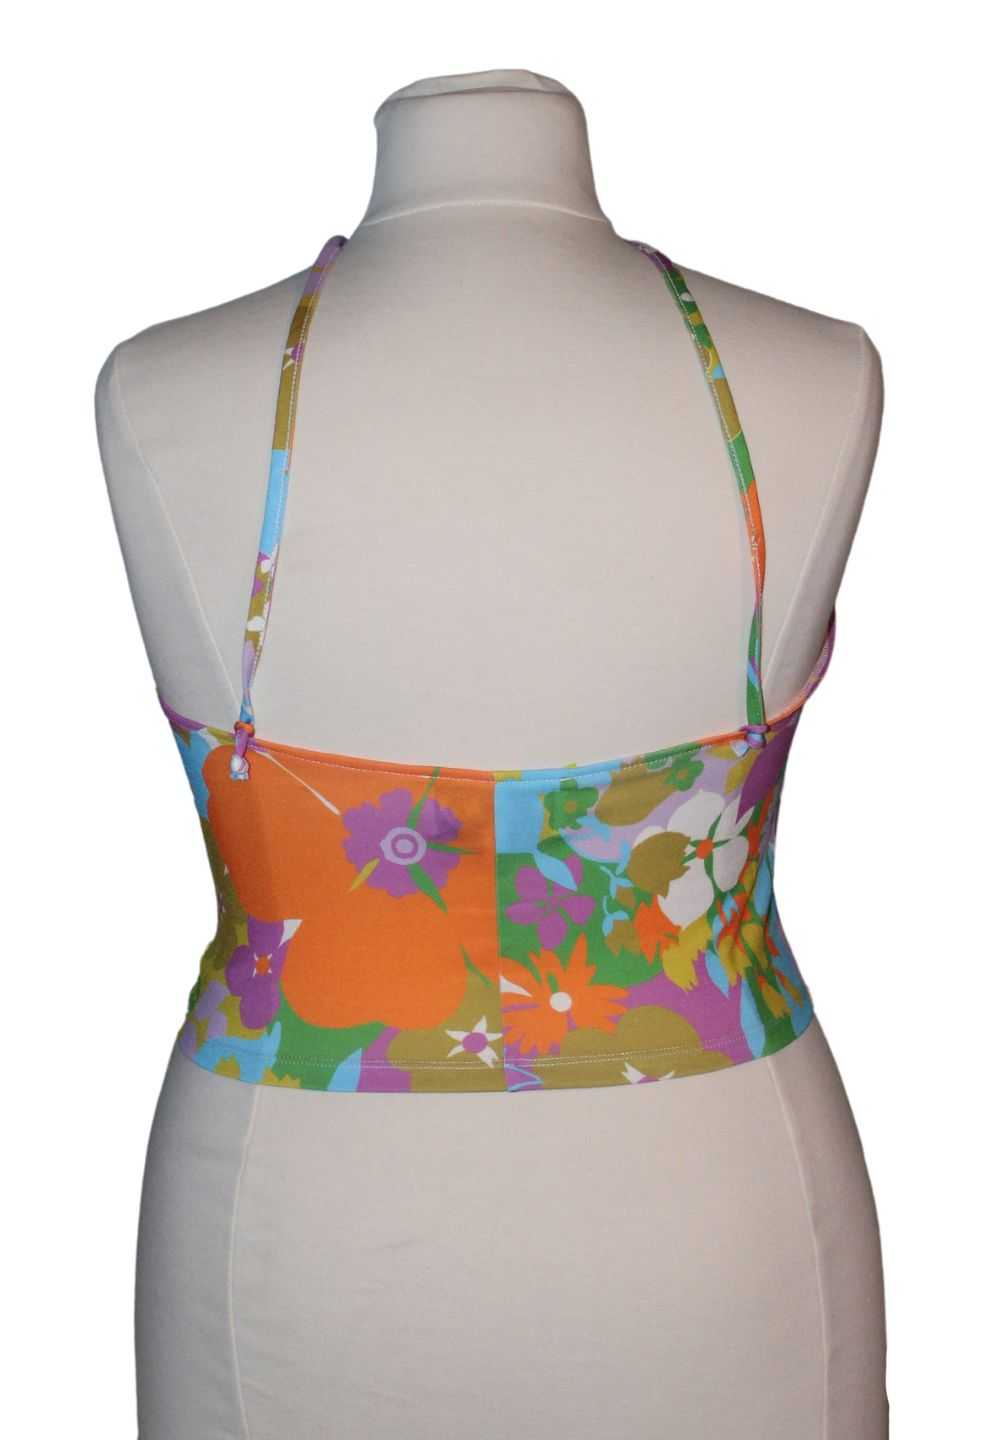 WRAY Floral Crop Top, Size 2XL - image 3